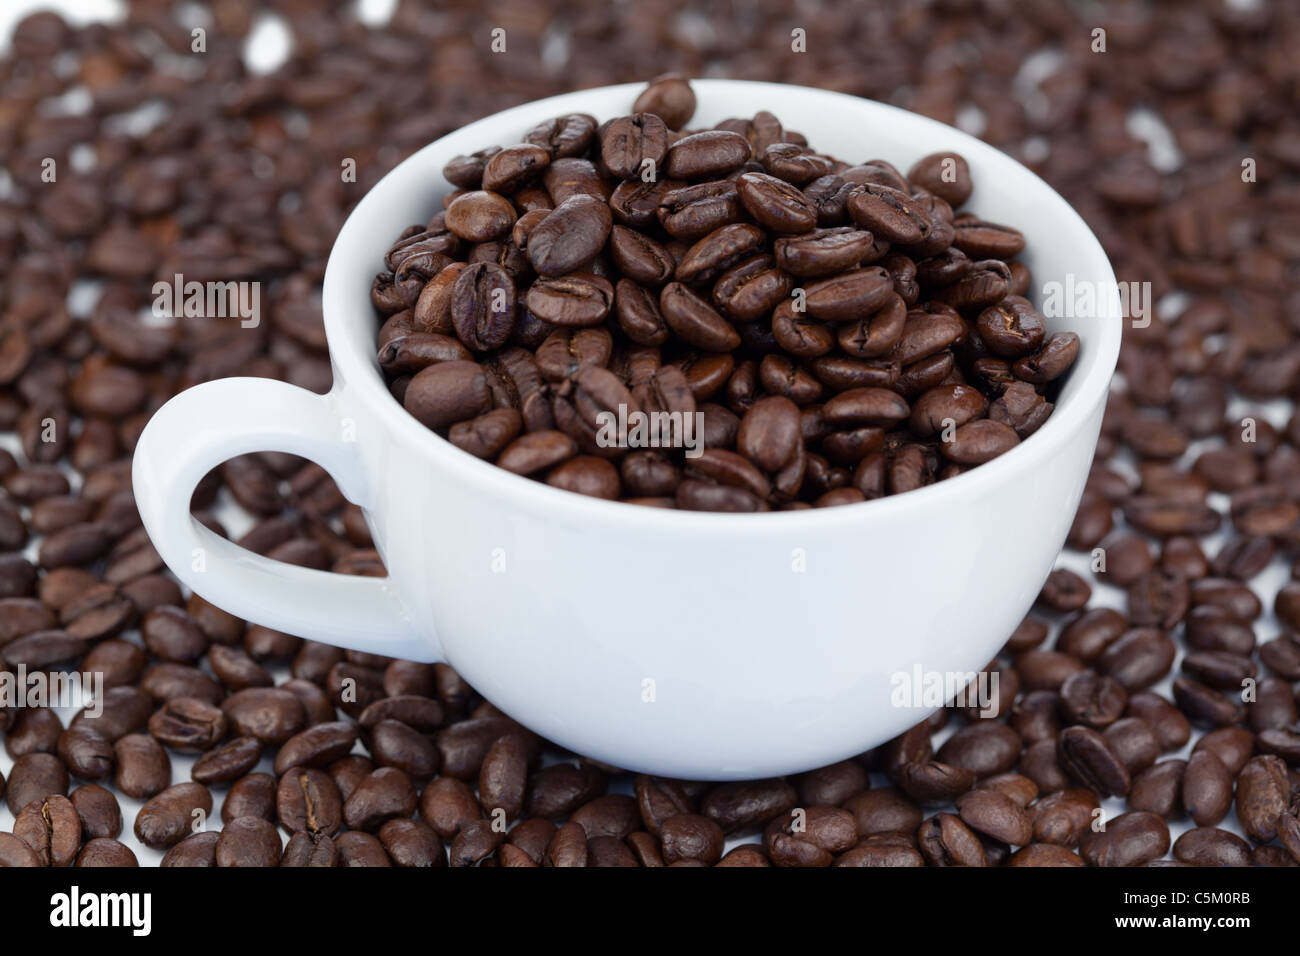 Small white cup of coffee beans Stock Photo